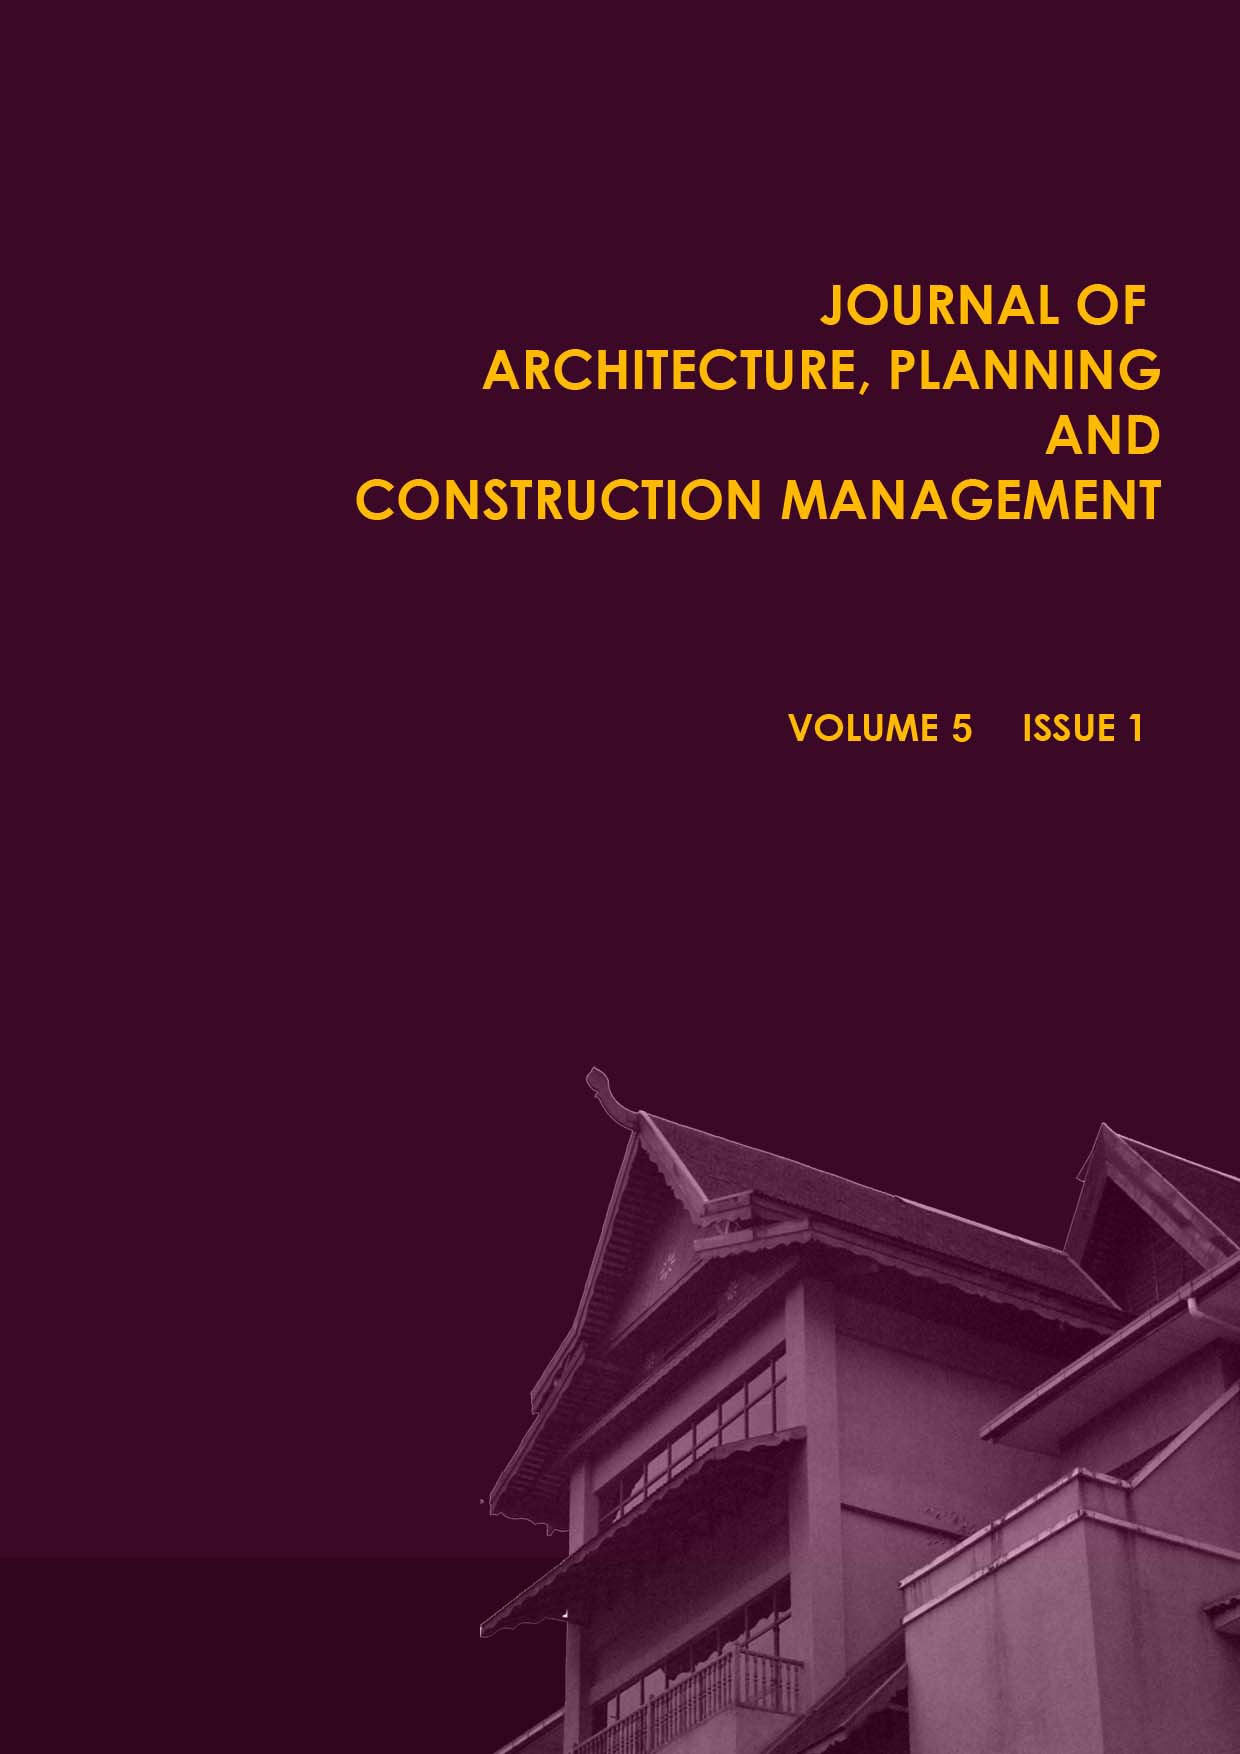 					View Vol. 5 No. 1 (2015): Journal of Architecture, Planning and Construction Management (JAPCM)
				